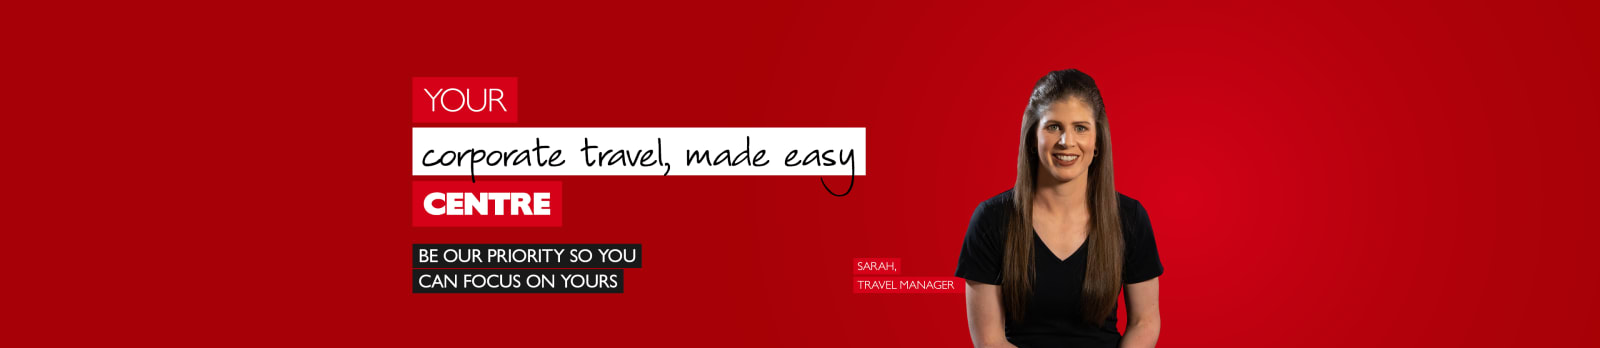 Your corporate travel, made easy centre - be our priority so you can focus on yours. Sarah - Travel Manager